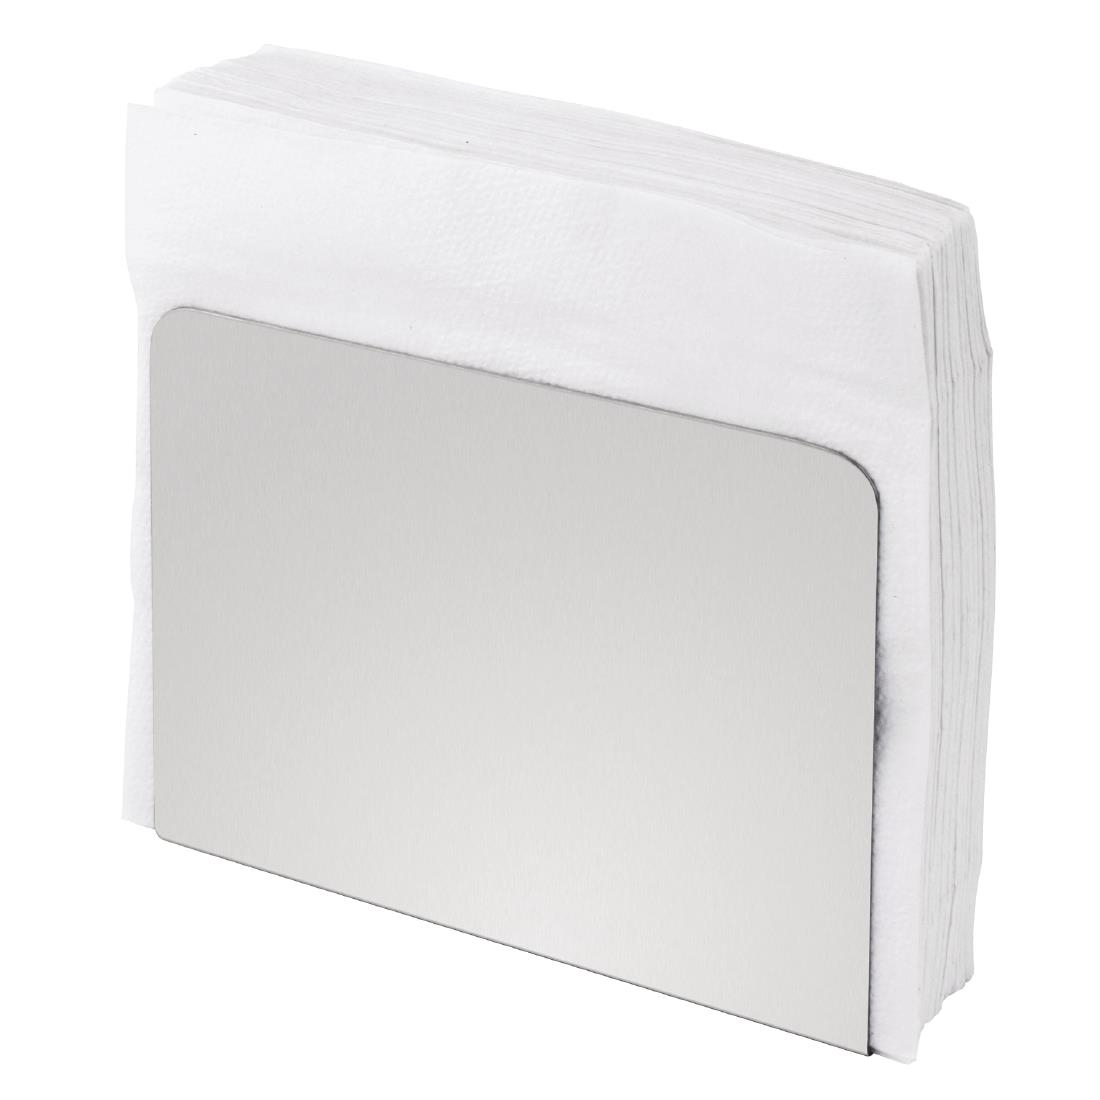 Olympia Napkin Holder Stainless Steel (CL337)